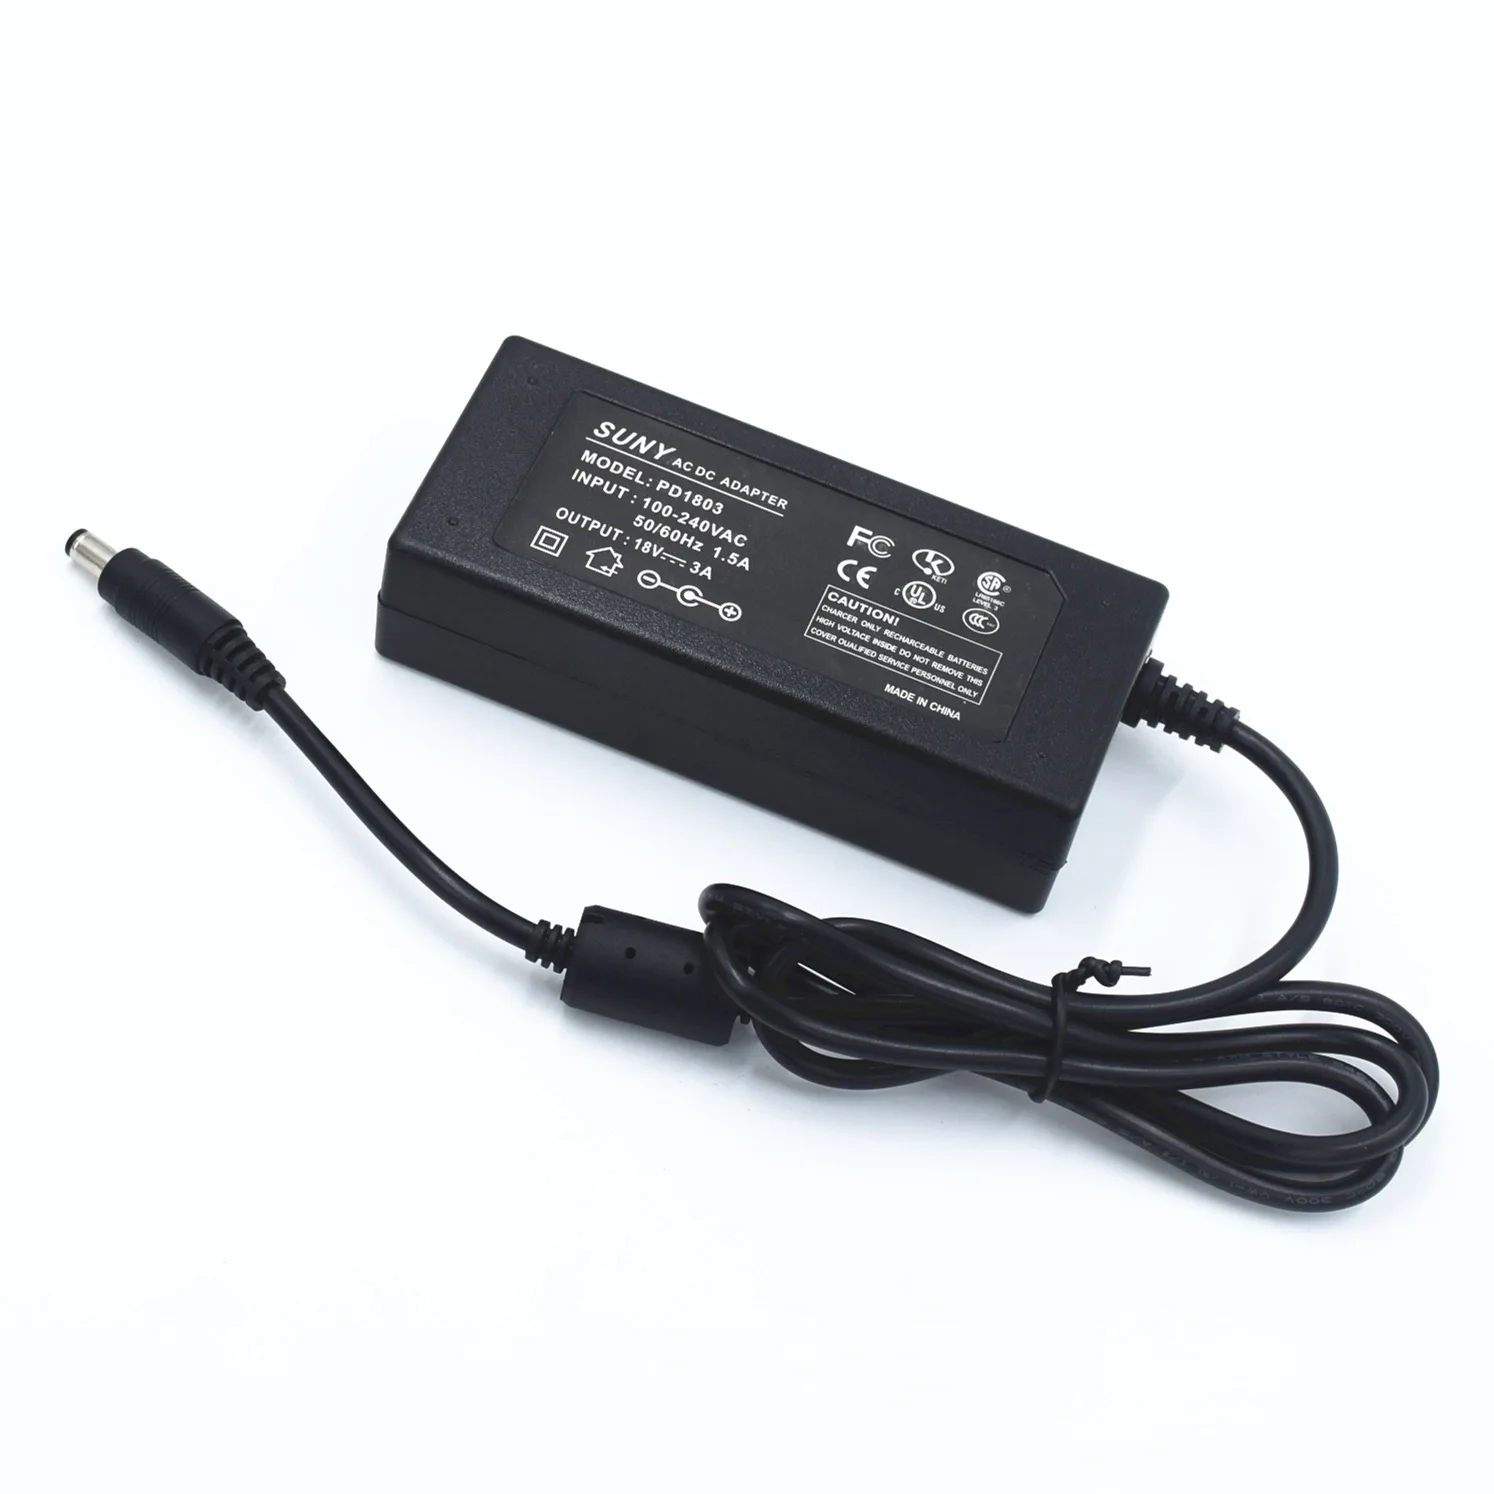 Switching CE FCC 24vdc 24 Volt 2 Amp 48w Led Power Supply 24v 2.0a AC DC Adapter 24volt 2amp Smps Adaptor